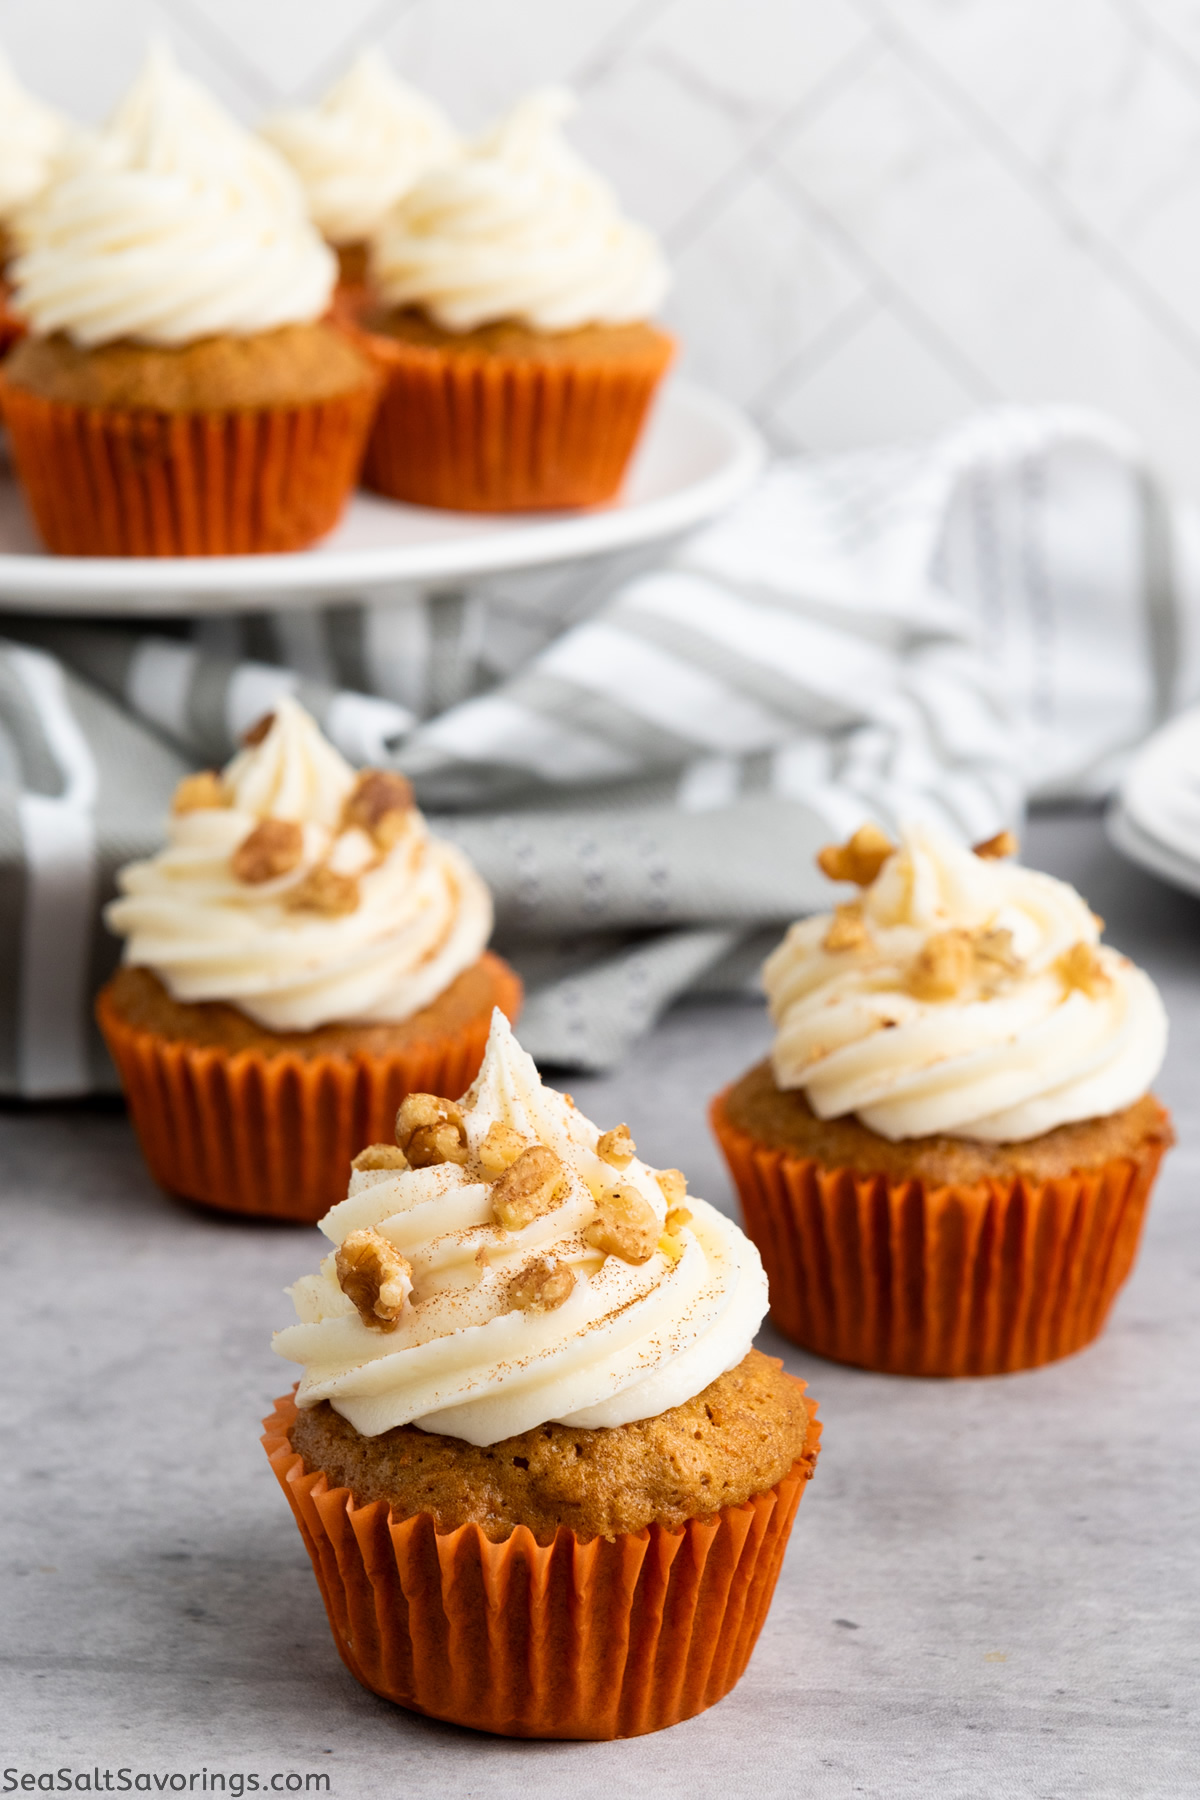 three carrot cupcakes with orange wrappers on a table with more cupcakes on a platter in the background